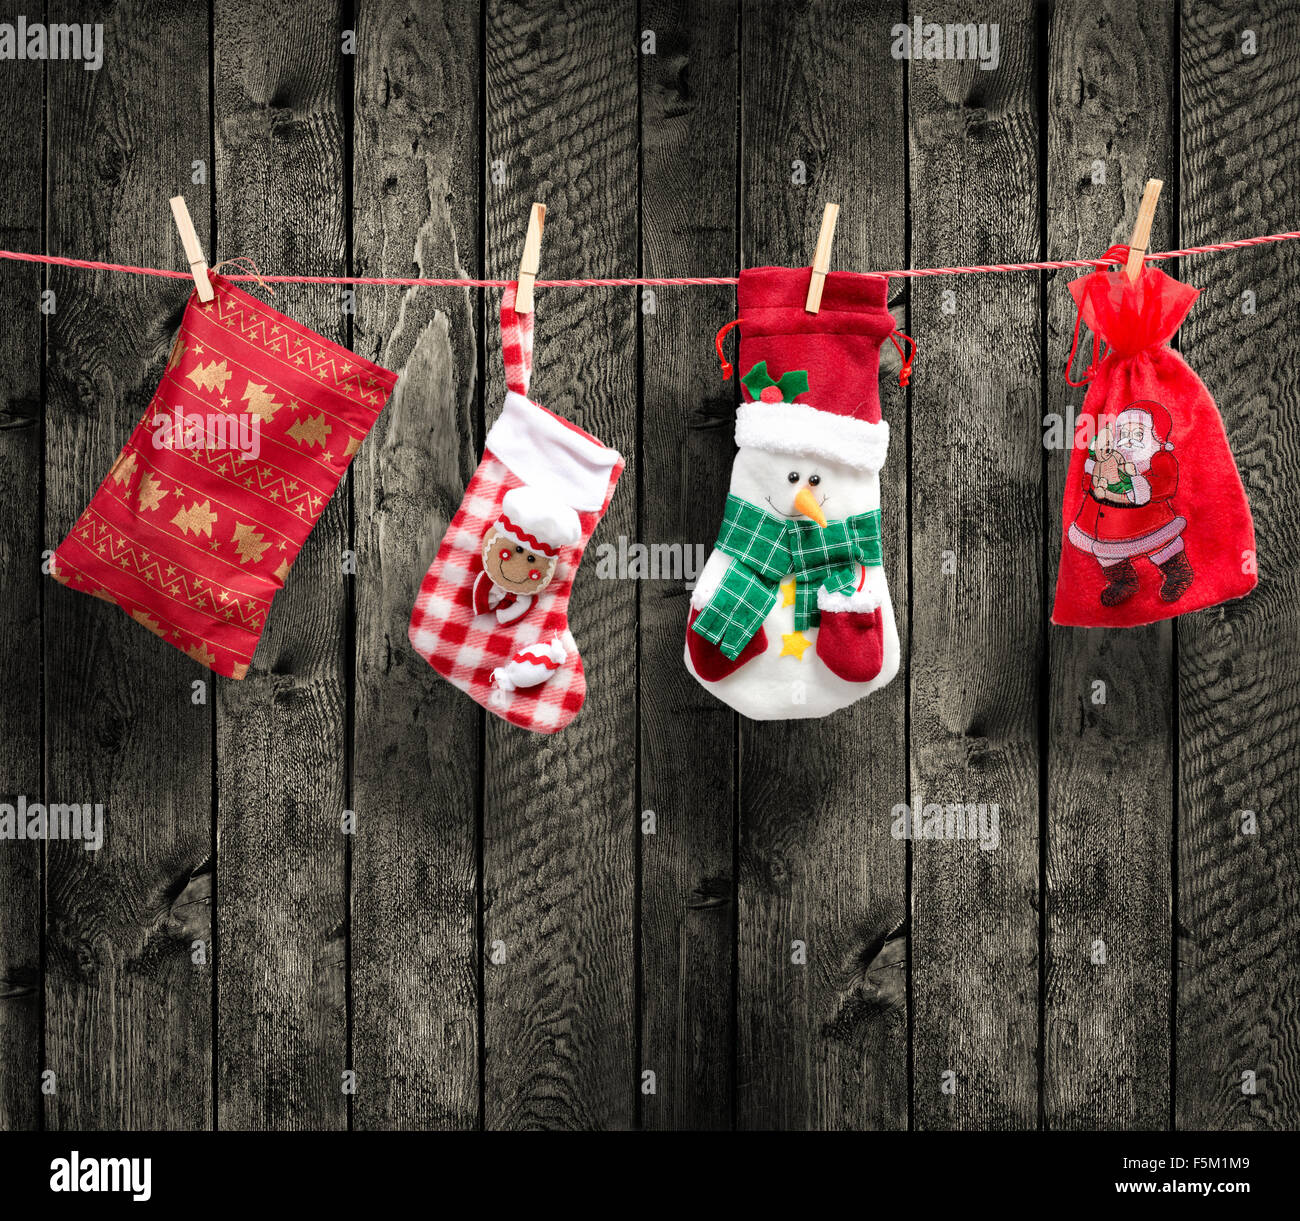 Santa's bag on the clothesline, with wood background Stock Photo